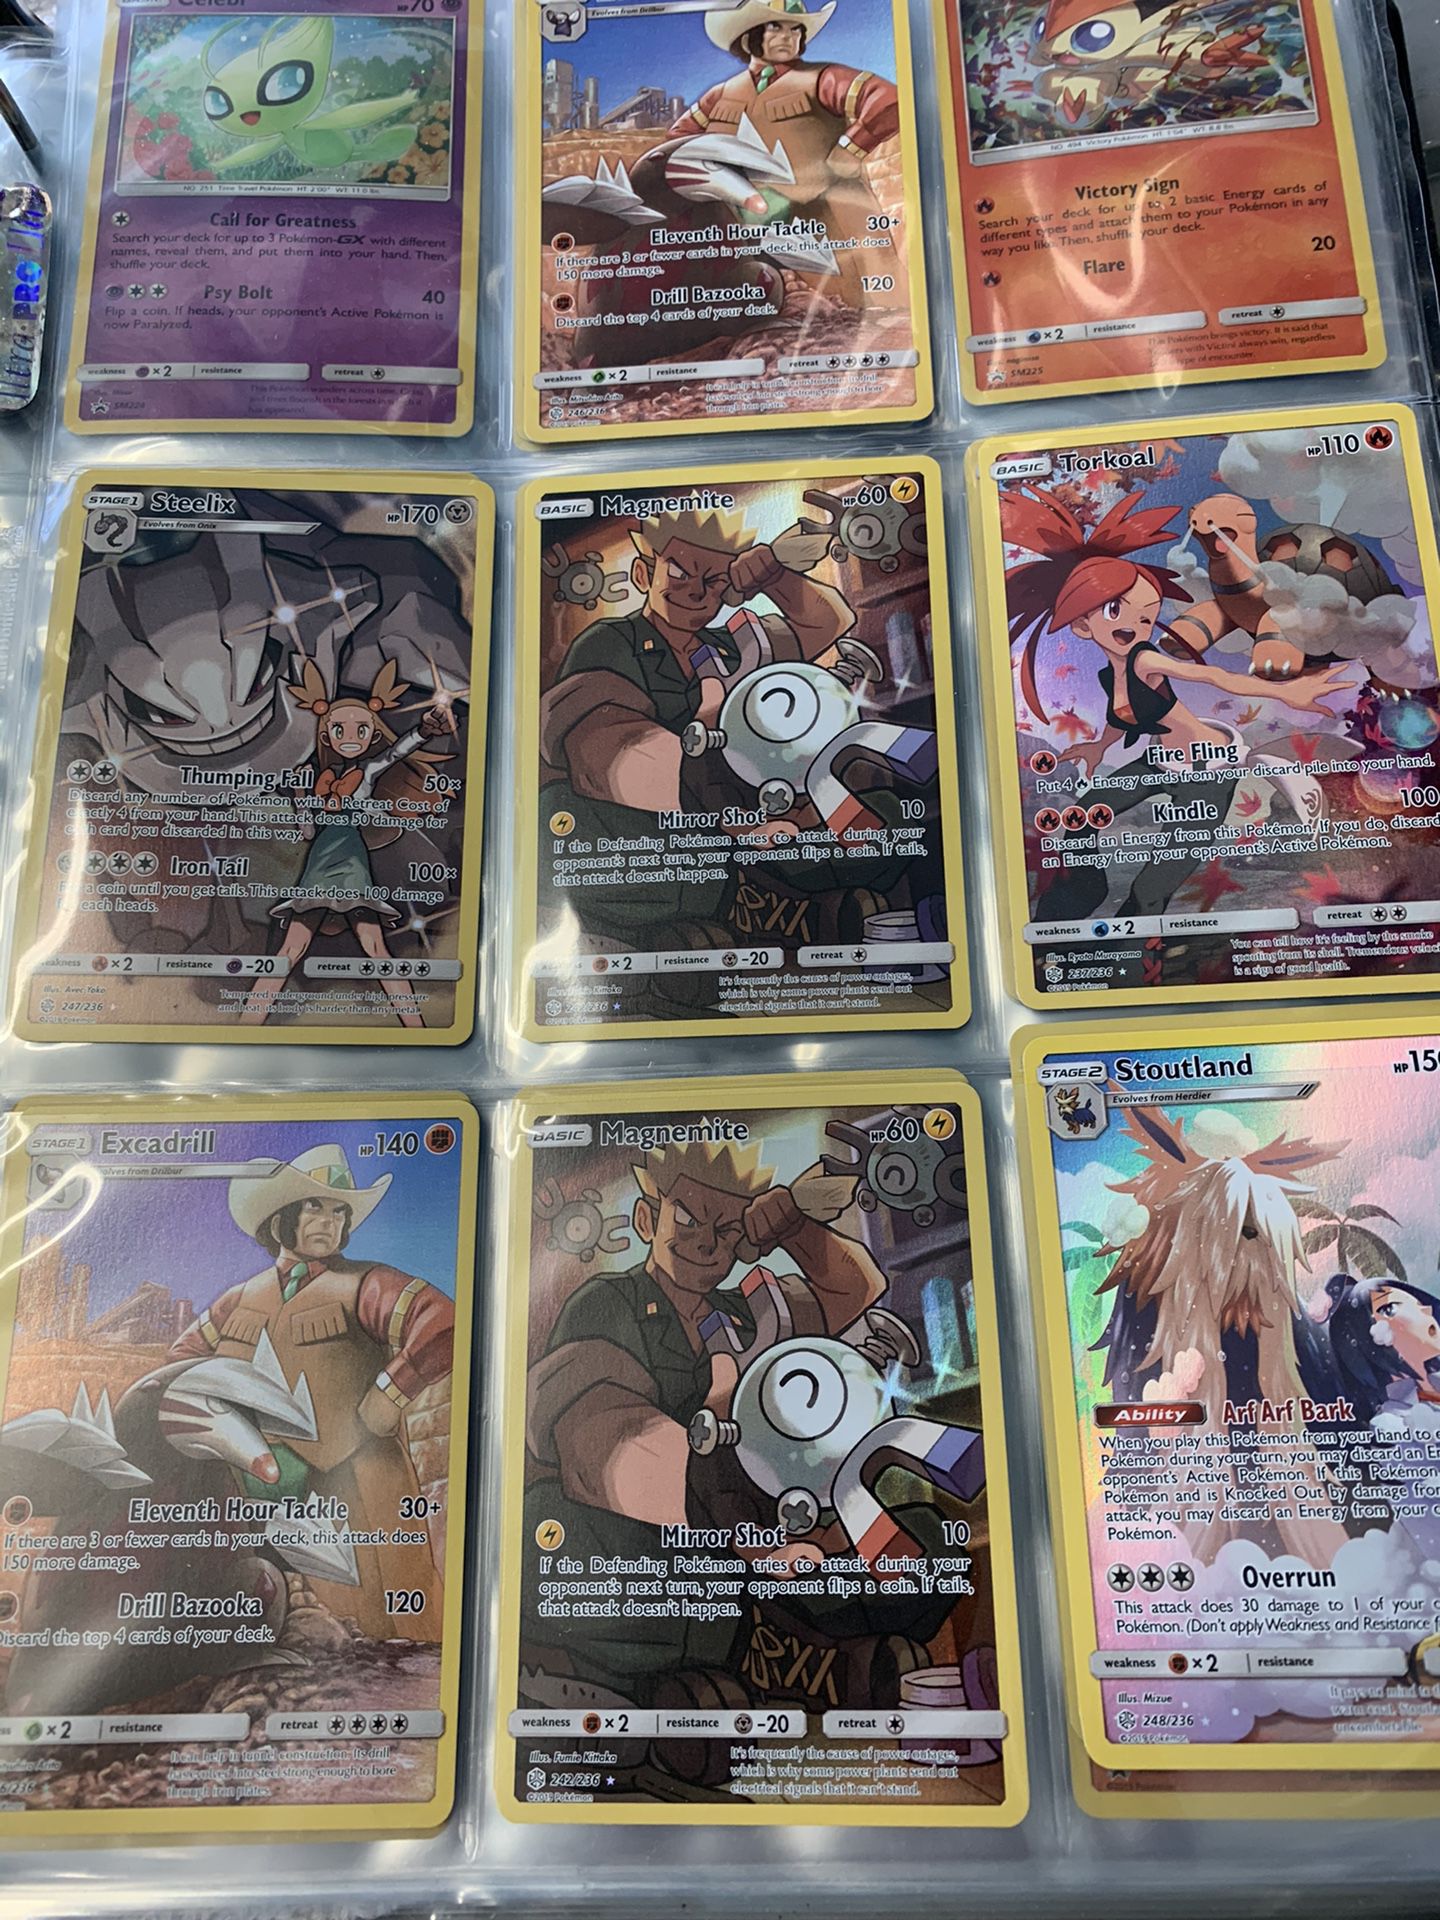 Pokémon cards holograms make me offers on which one you want